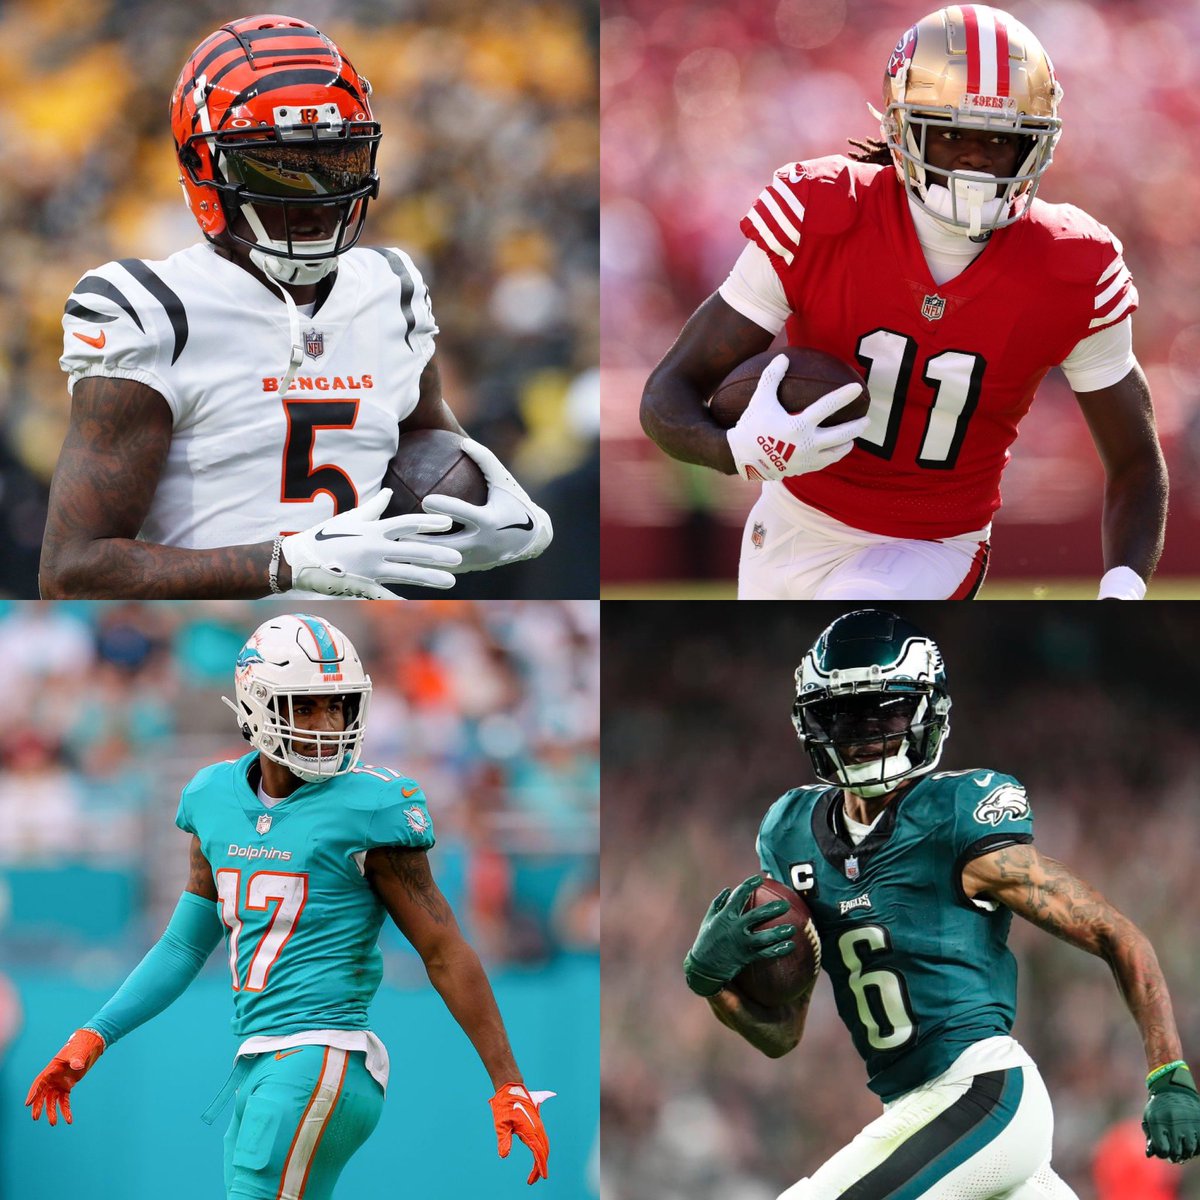 Who is the best wide receiver here 👀